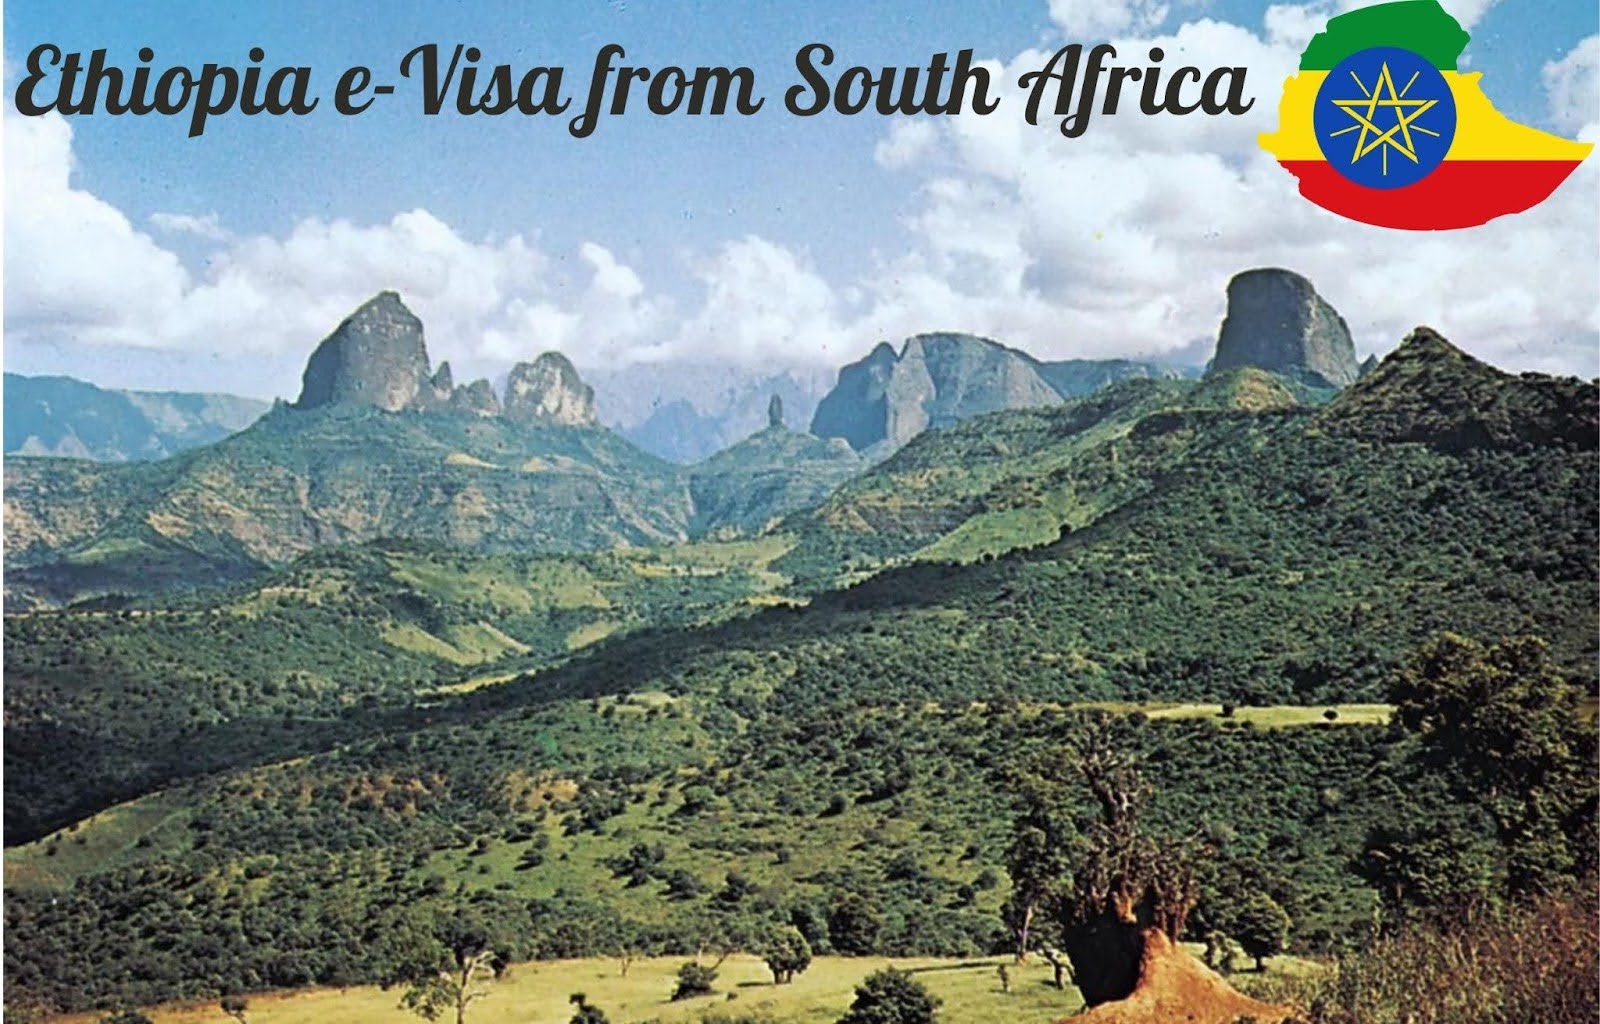 Ethiopia e-Visa from South Africa